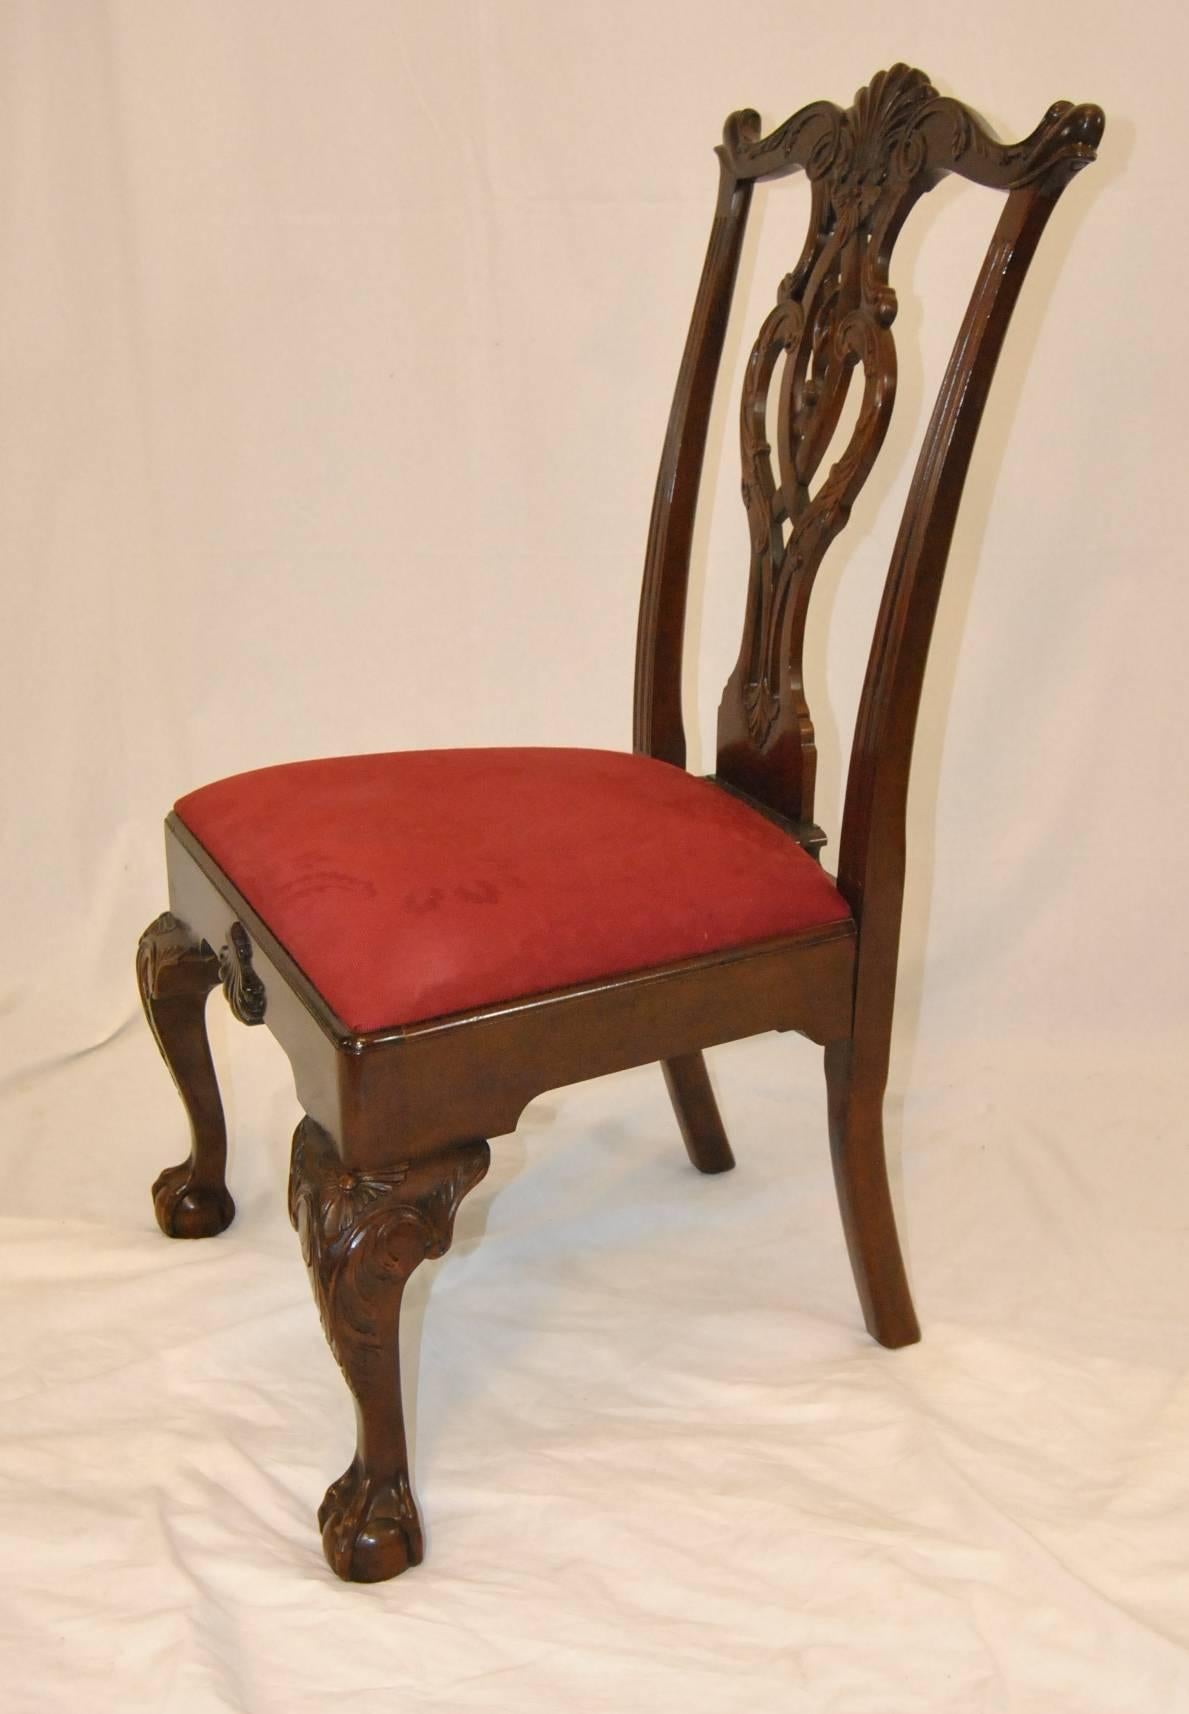 A great set of mahogany dining side chairs by the Century Furniture Company. These are the "Philadelphia Tassel" chairs and are reproduction of a 1760 chair owned by the Supreme Court Justice Samuel Chase. They are extra wide and heavy and